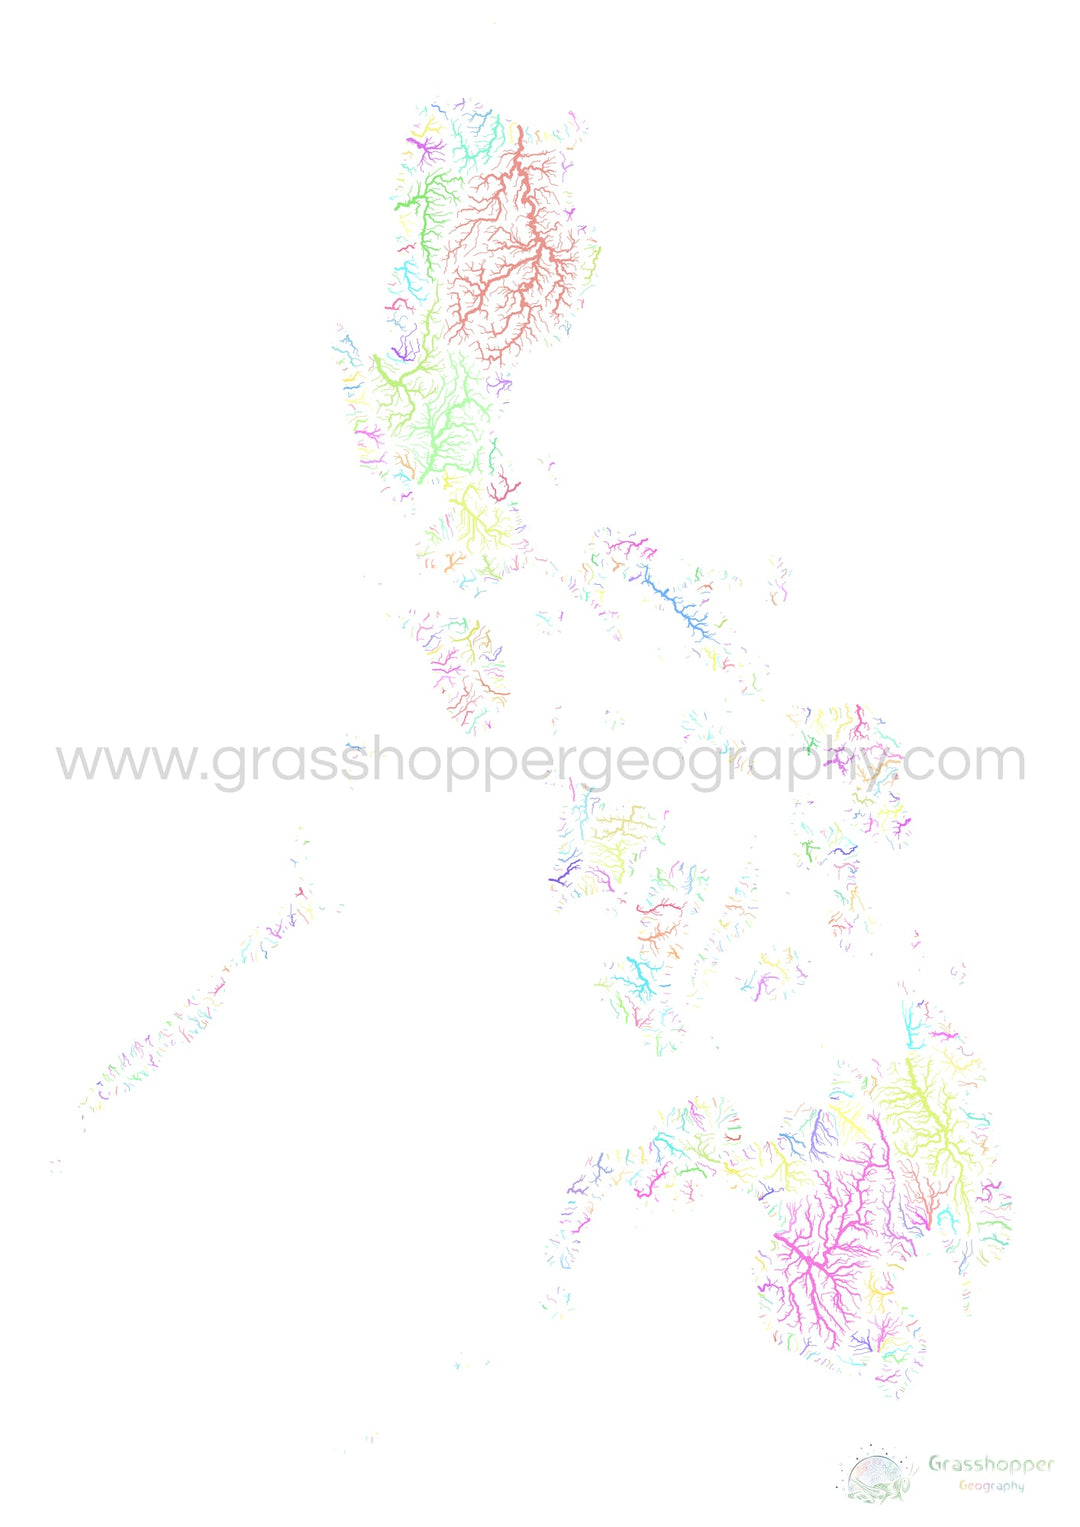 The Philippines - River basin map, pastel on white - Fine Art Print